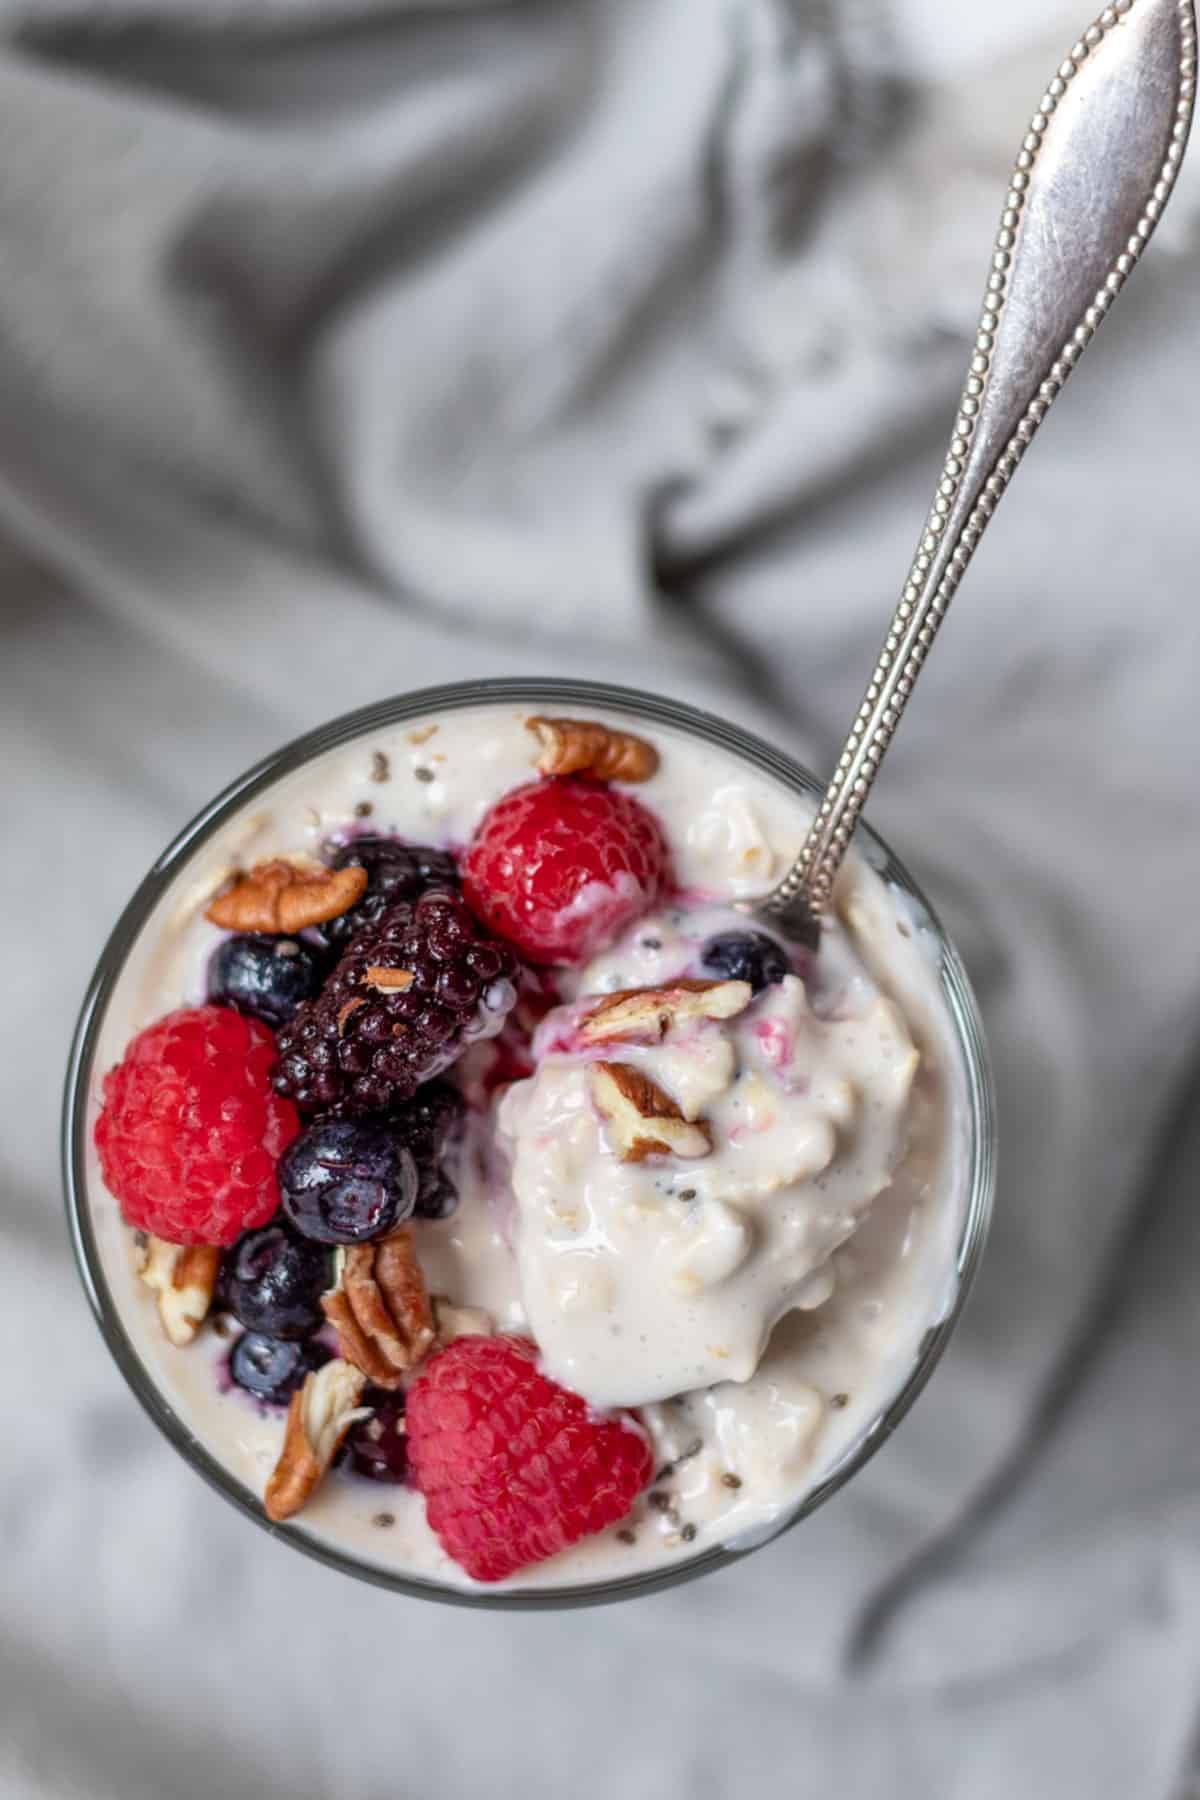 A spoon scooping up creamy oats with yogurt with mixed berries and chopped pecans.